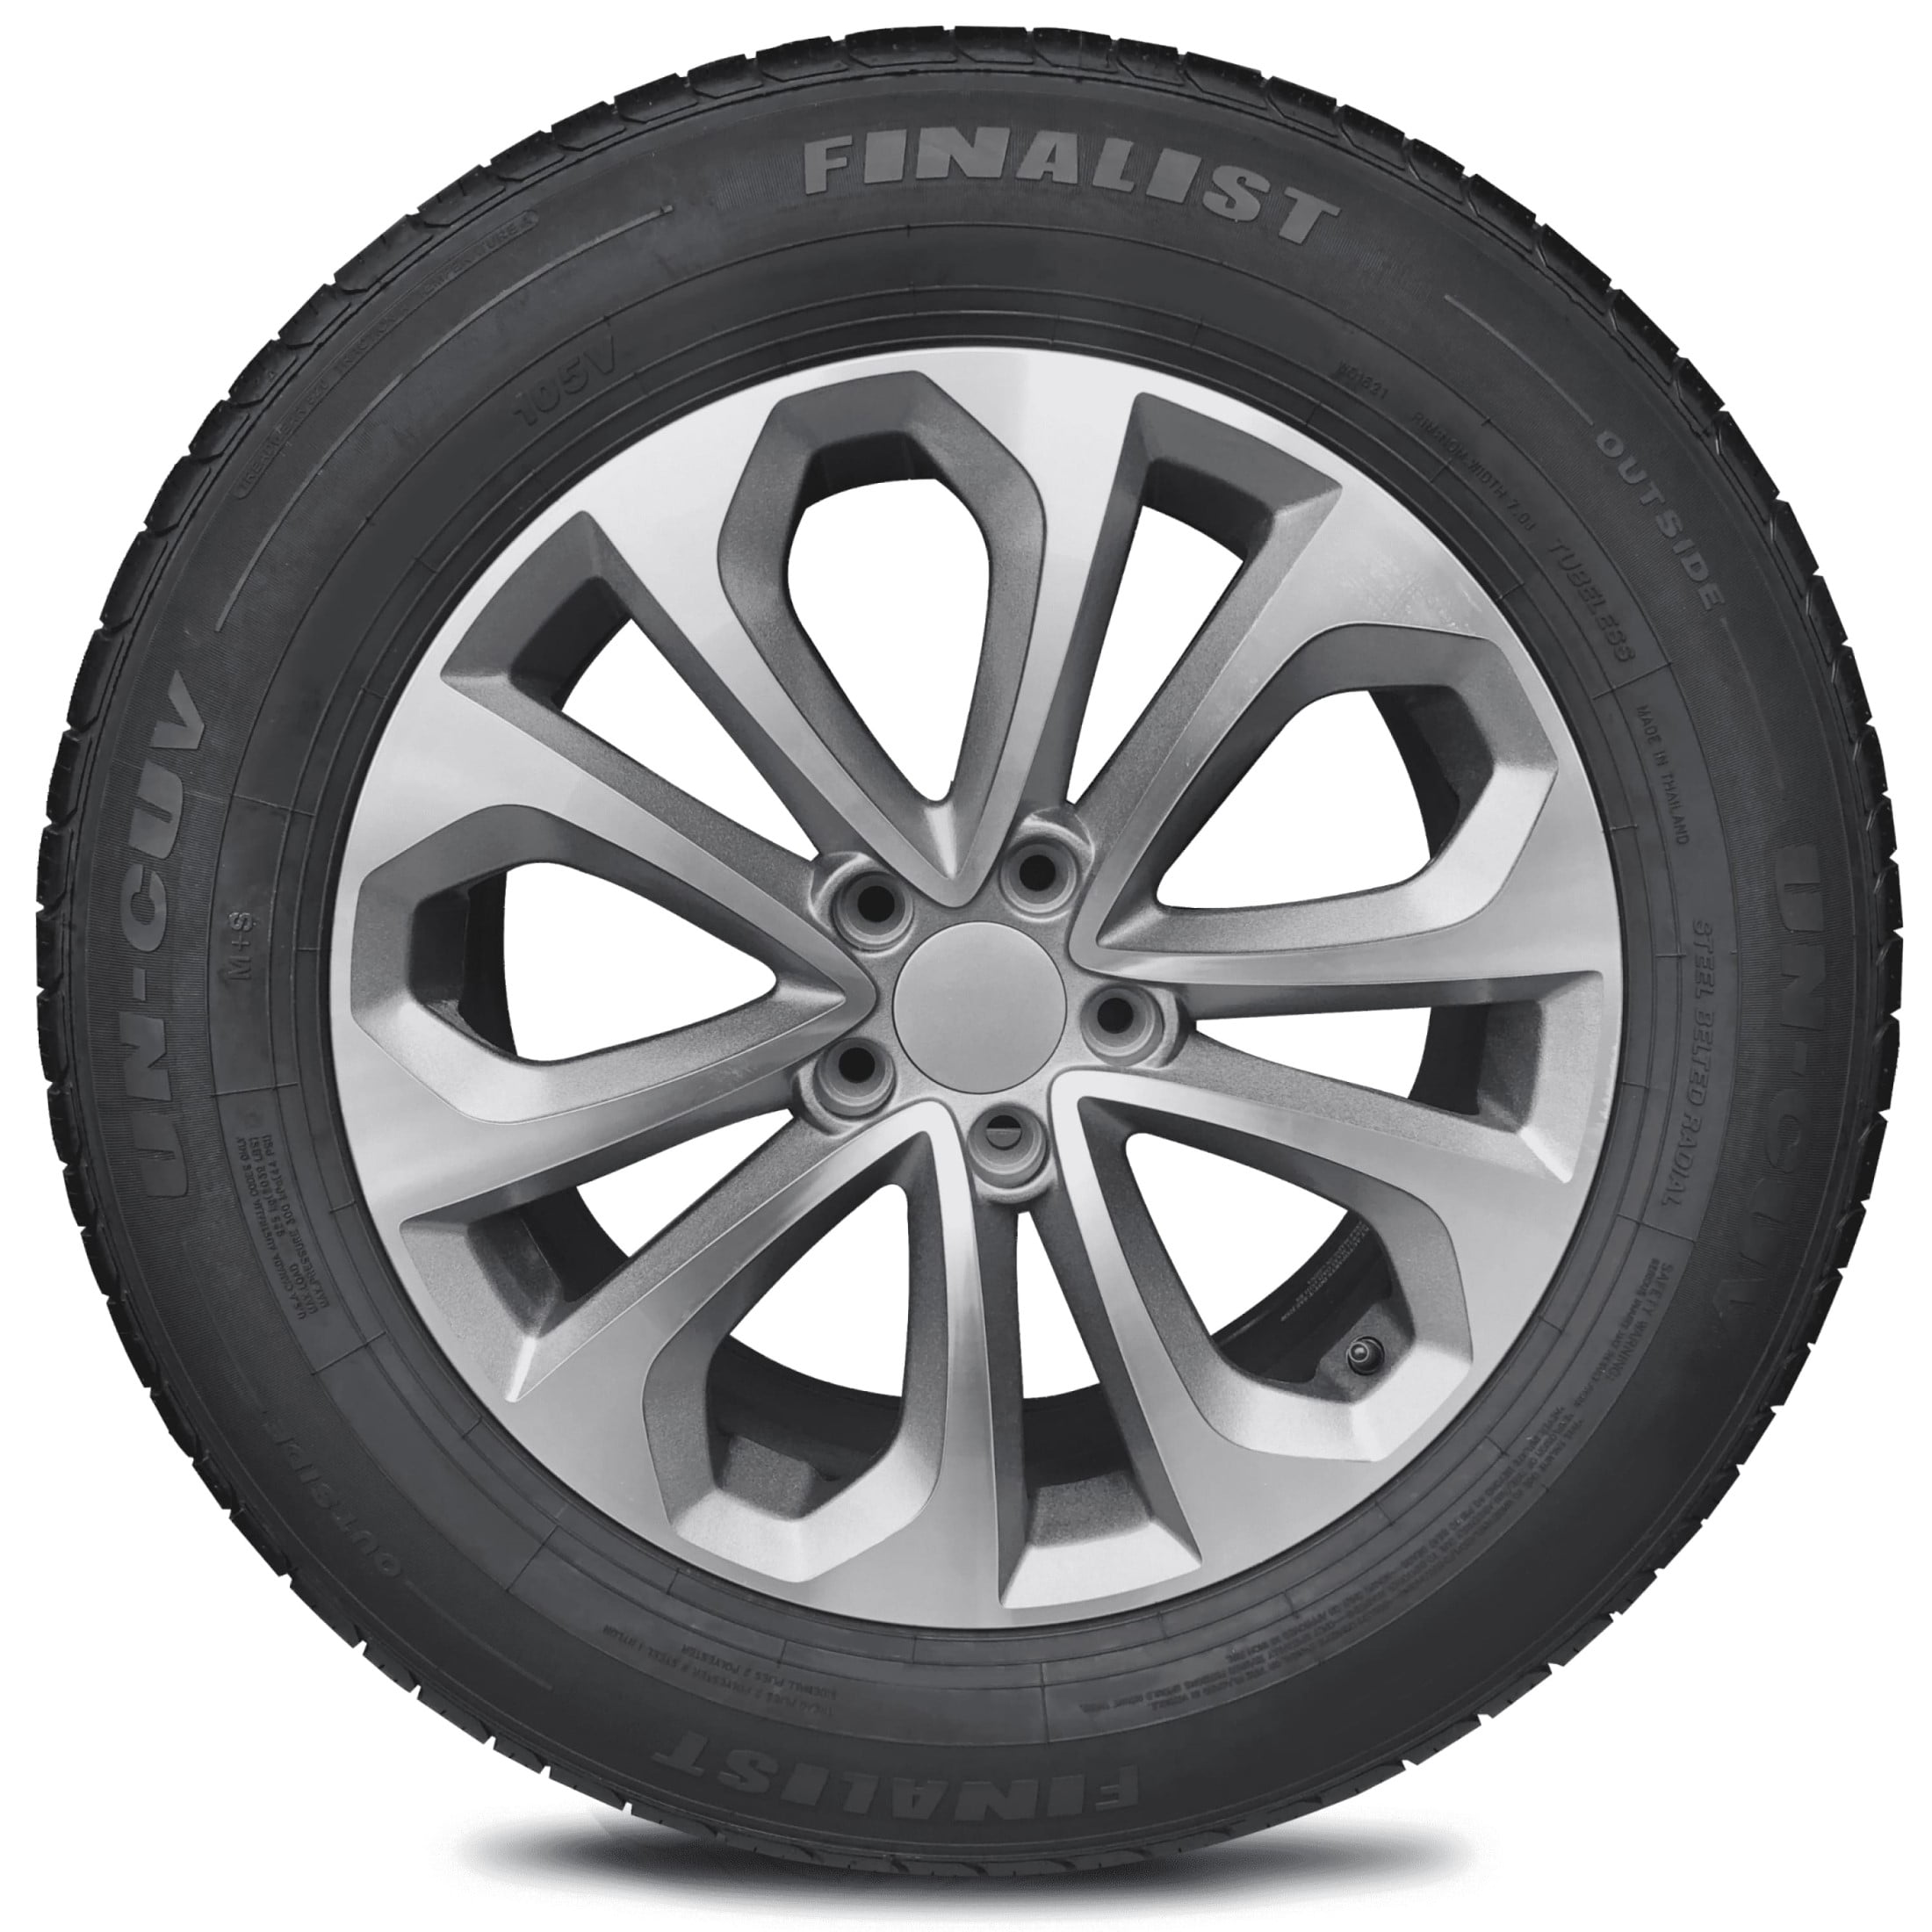 Finalist UN-CUV 235/65R17 108V All Season XL Extra Load CUV SUV A/S High  Performance Tire 235/65/17 (Tire Only)